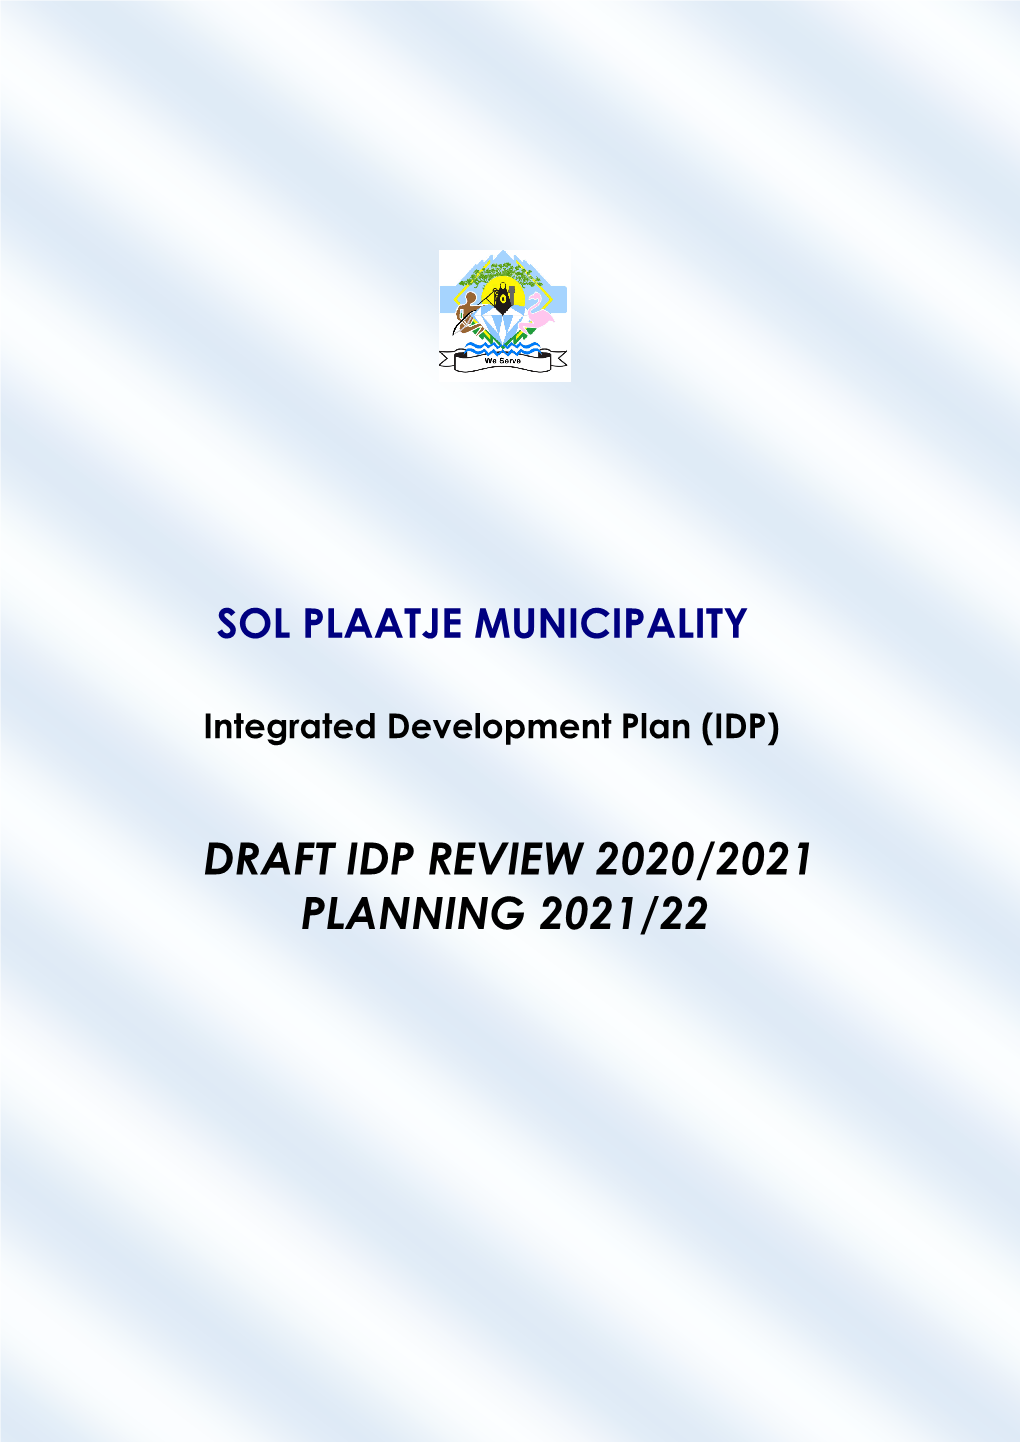 Draft Idp Review 2020/2021 Planning 2021/22 Table of Contents